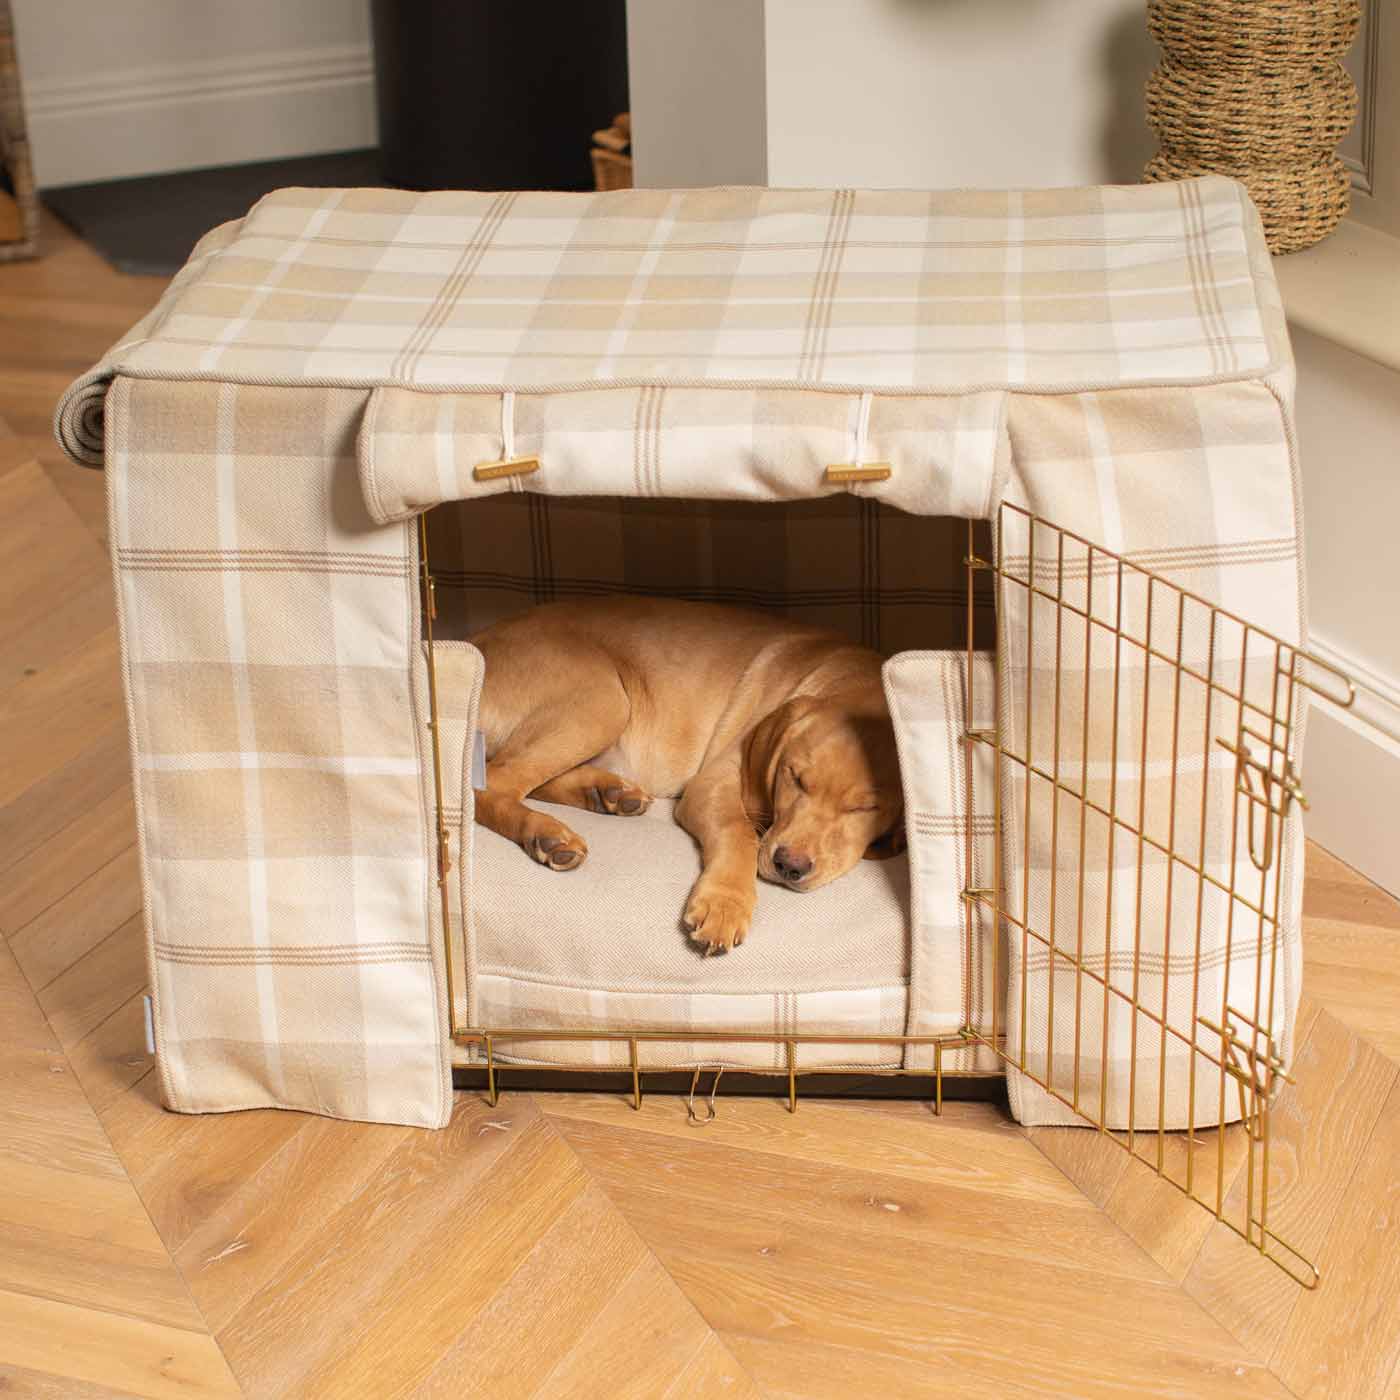 Luxury Heavy Duty Dog Crate, In Stunning Balmoral Natural Tweed Crate Set, The Perfect Dog Crate Set For Building The Ultimate Pet Den! Dog Crate Cover Available To Personalise at Lords & Labradors 